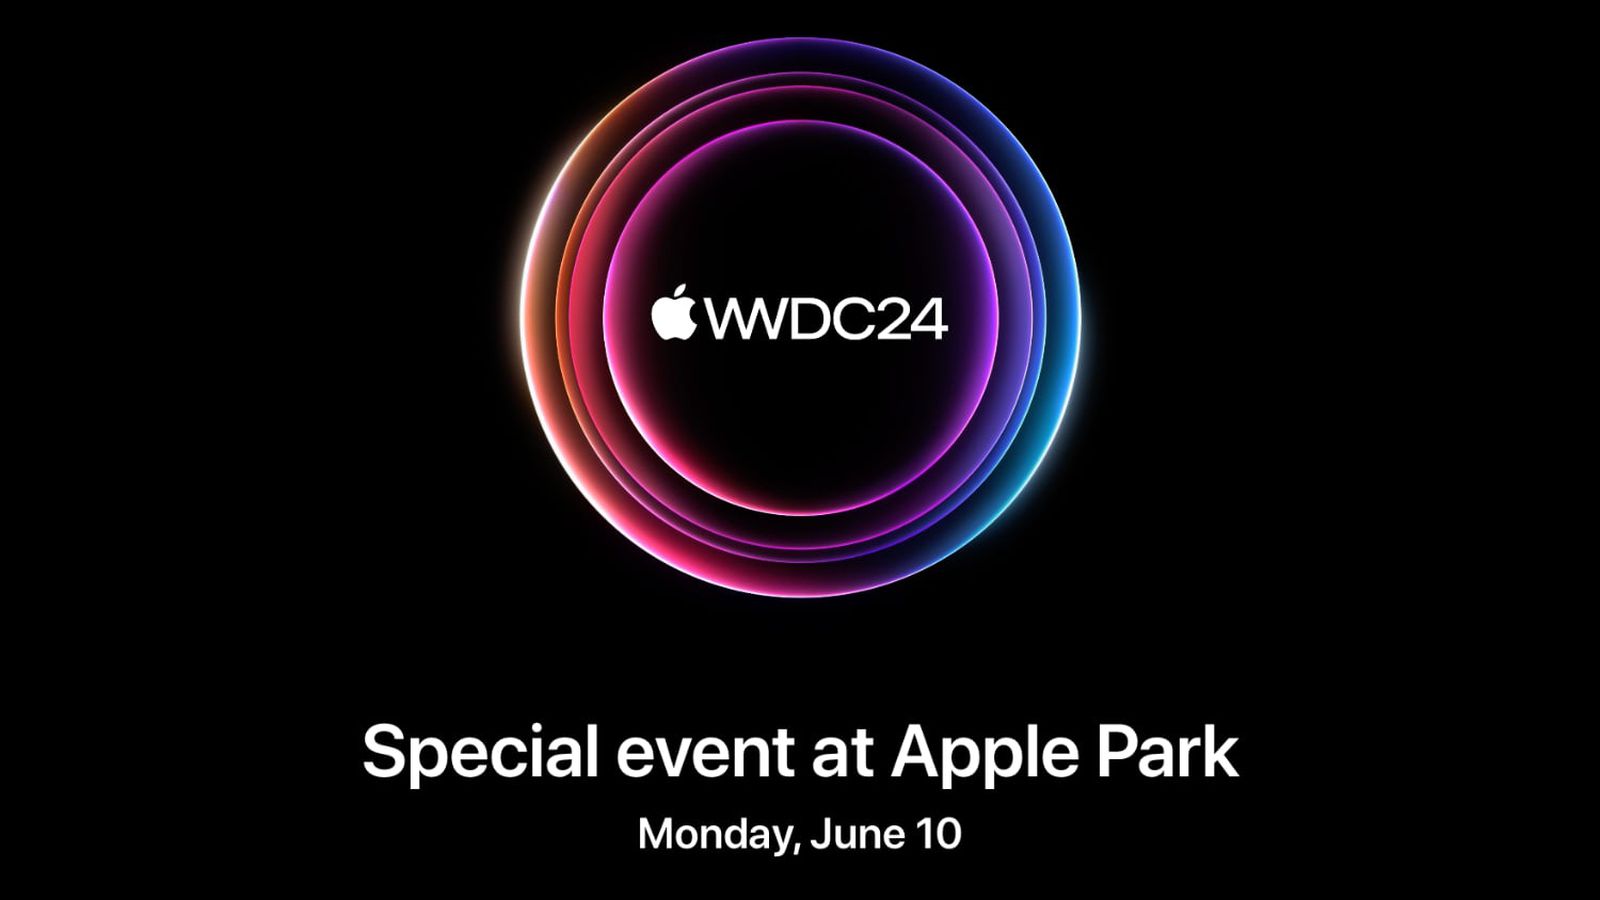 At WWDC 2024, Apple Park will Host InPerson Special Event 'MacRumors